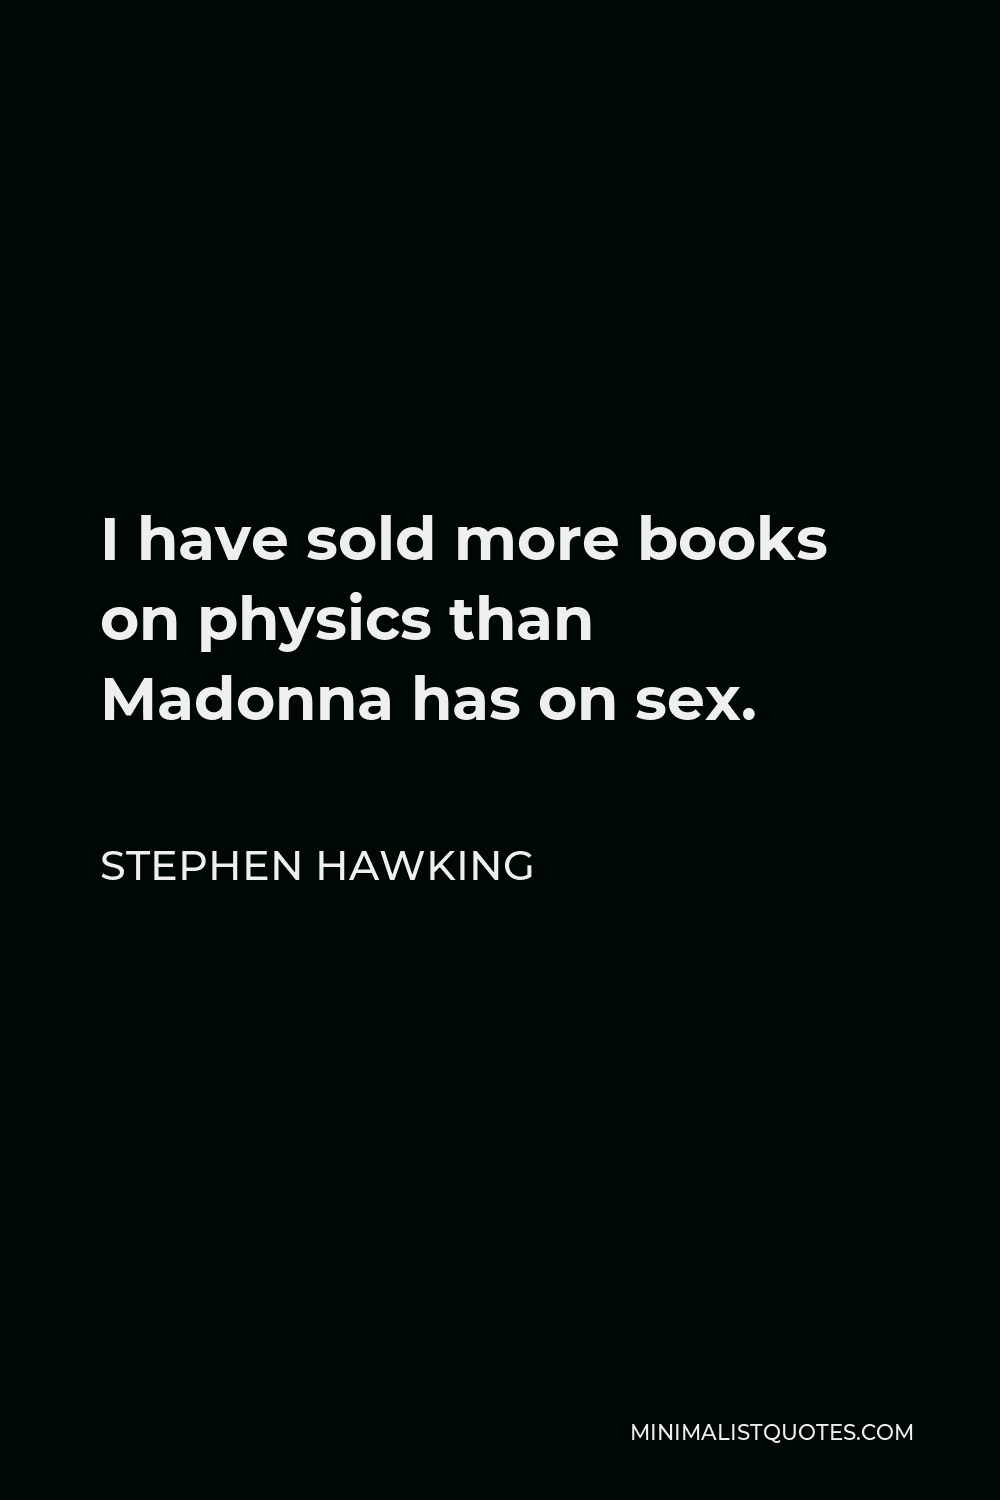 Stephen Hawking Quote - I have sold more books on physics than Madonna has on sex.